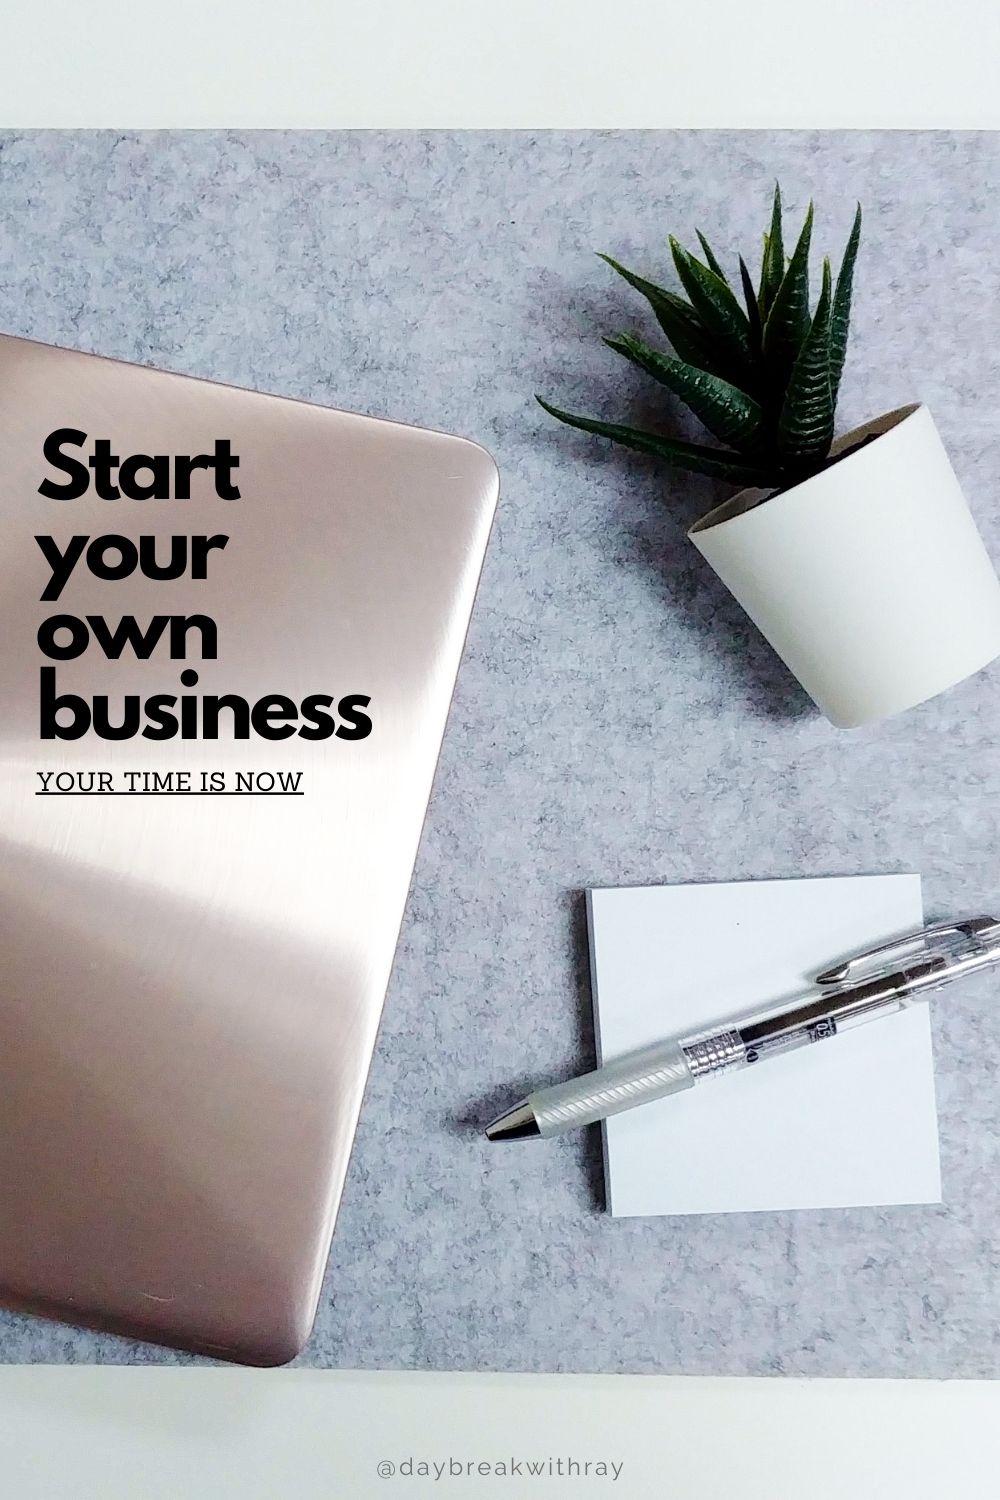 Want to start your own business